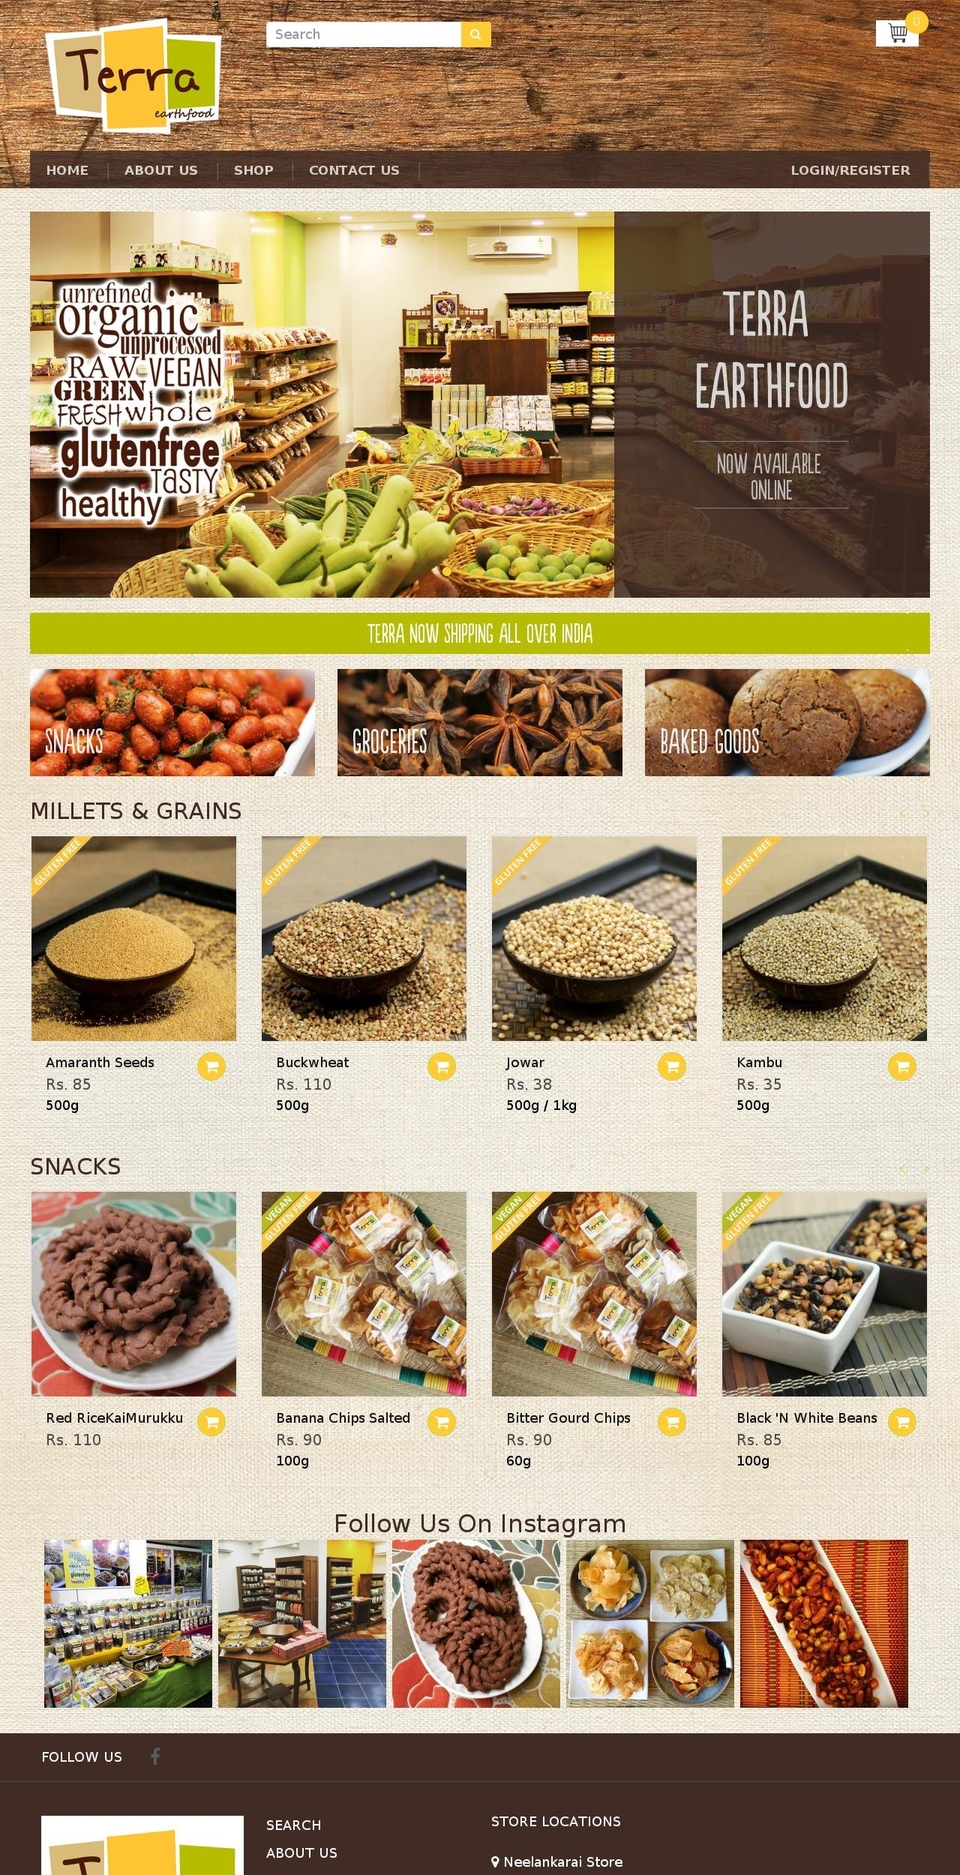 Handy Shopify theme site example terraearthfood.com